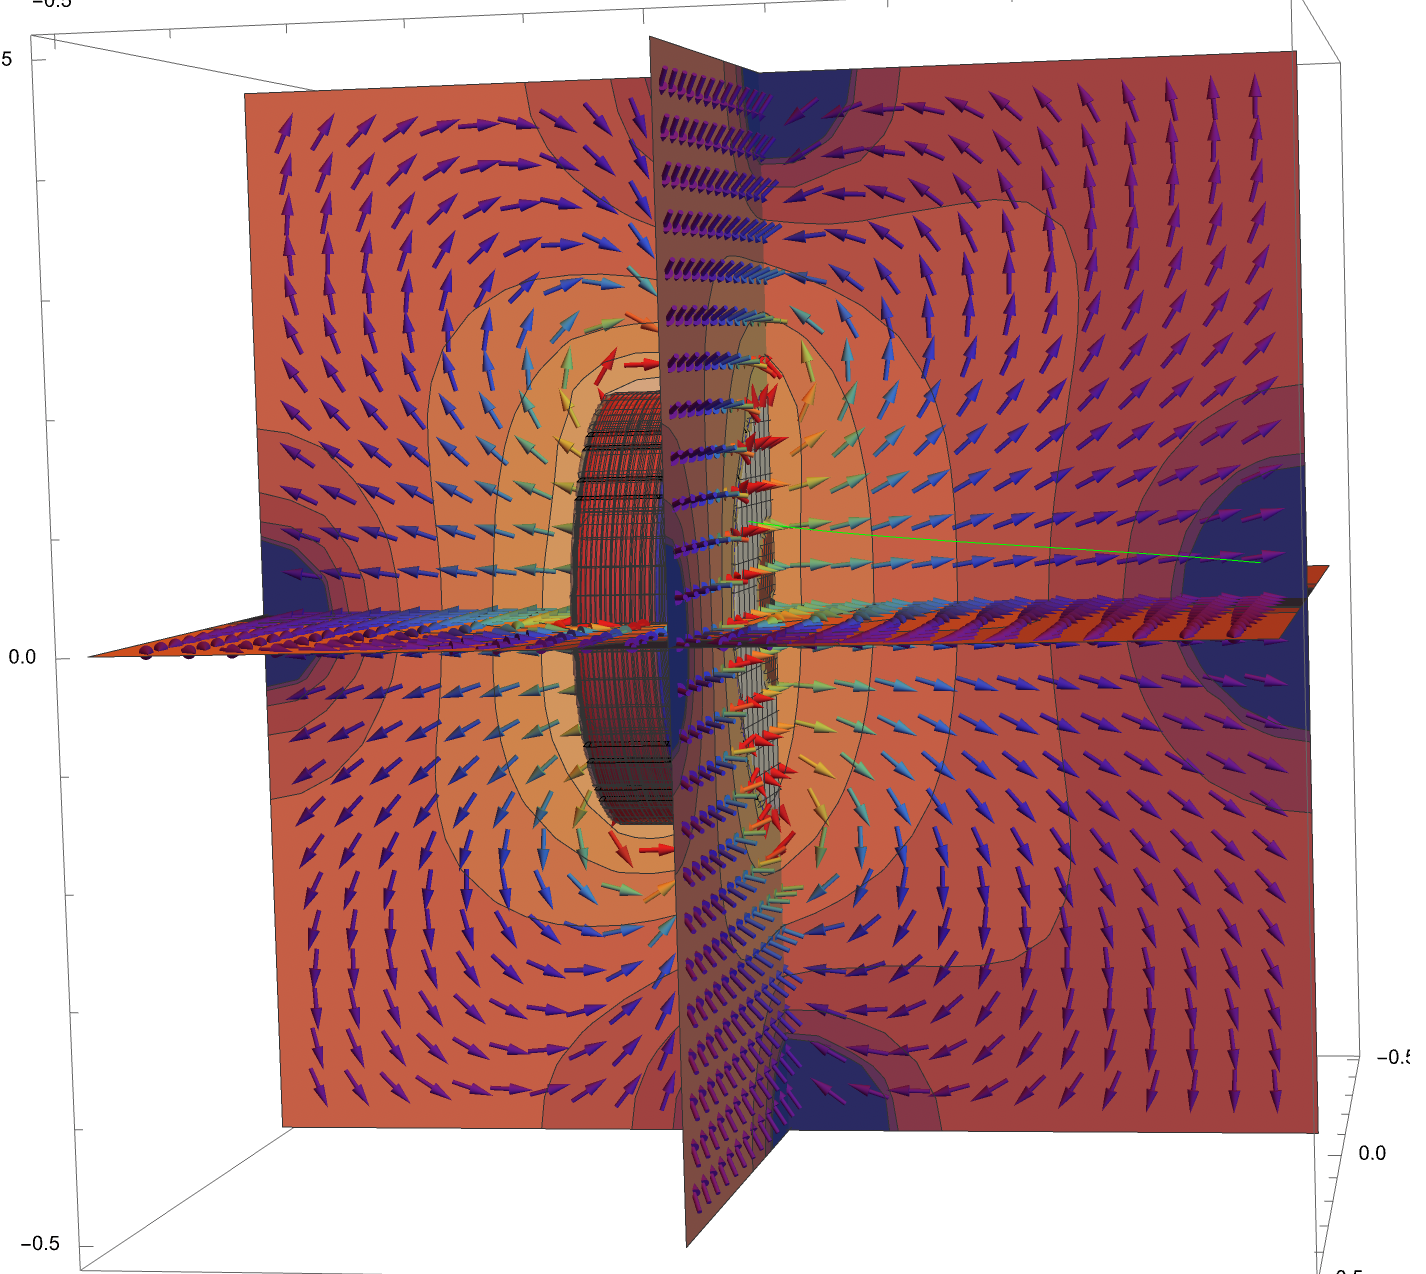 Visualization of the electromagnetic field generated from a hall thruster as well as the ion trajectory